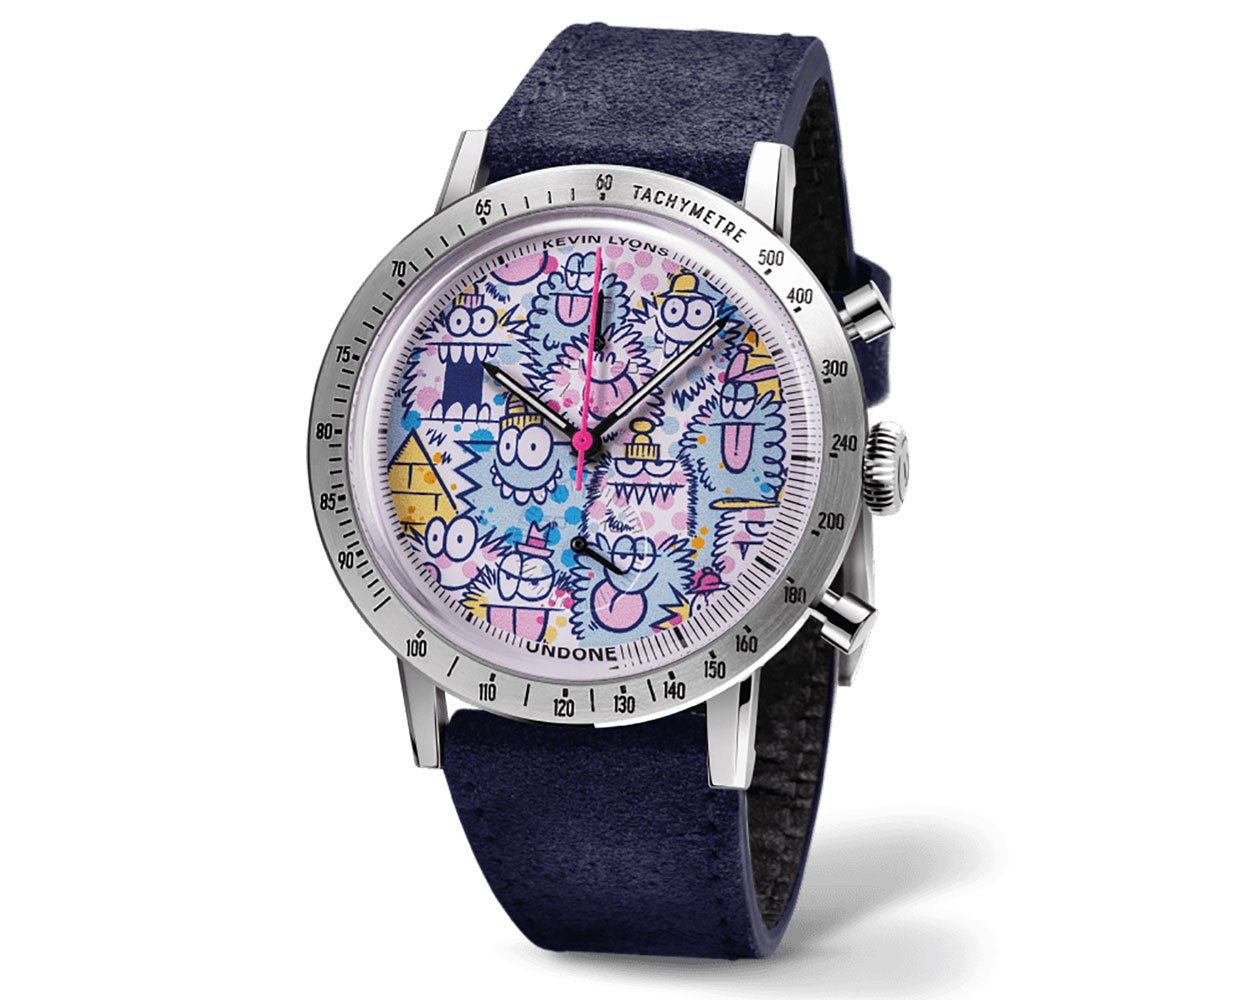 Undone x Kevin Lyons Monsters Watch